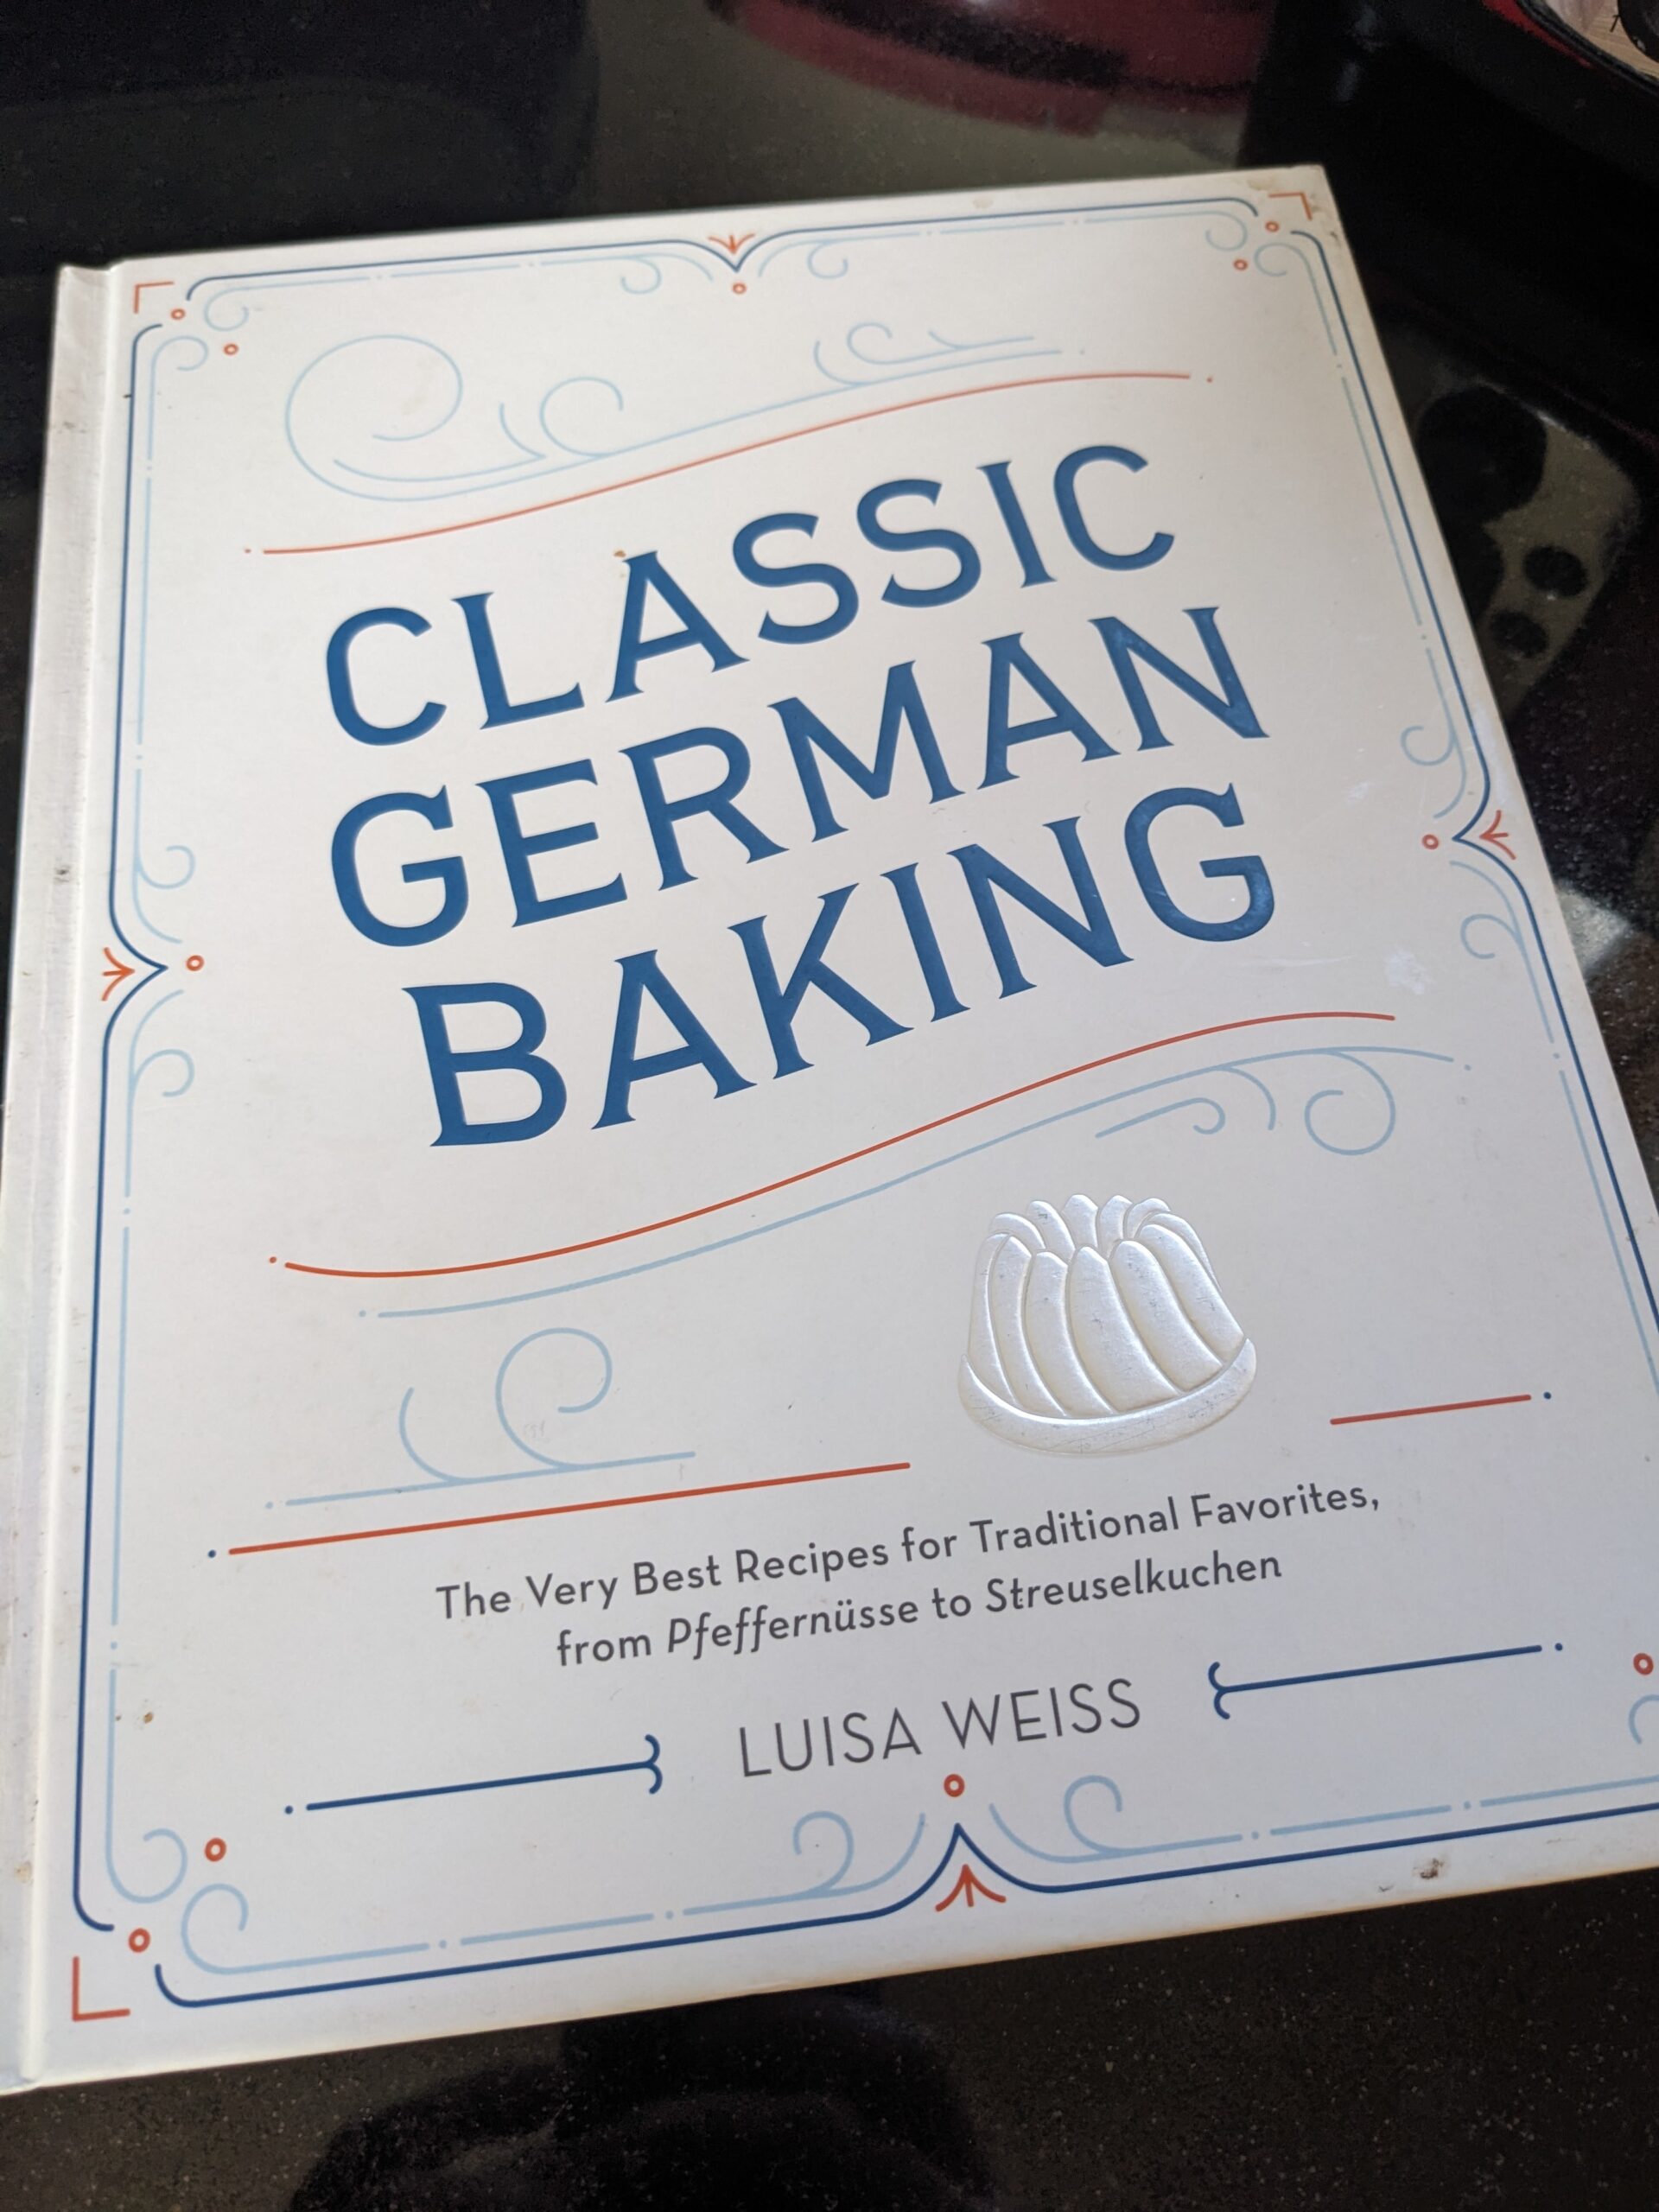 Image of the book 'Classic German Baking' by Luisa Weiss